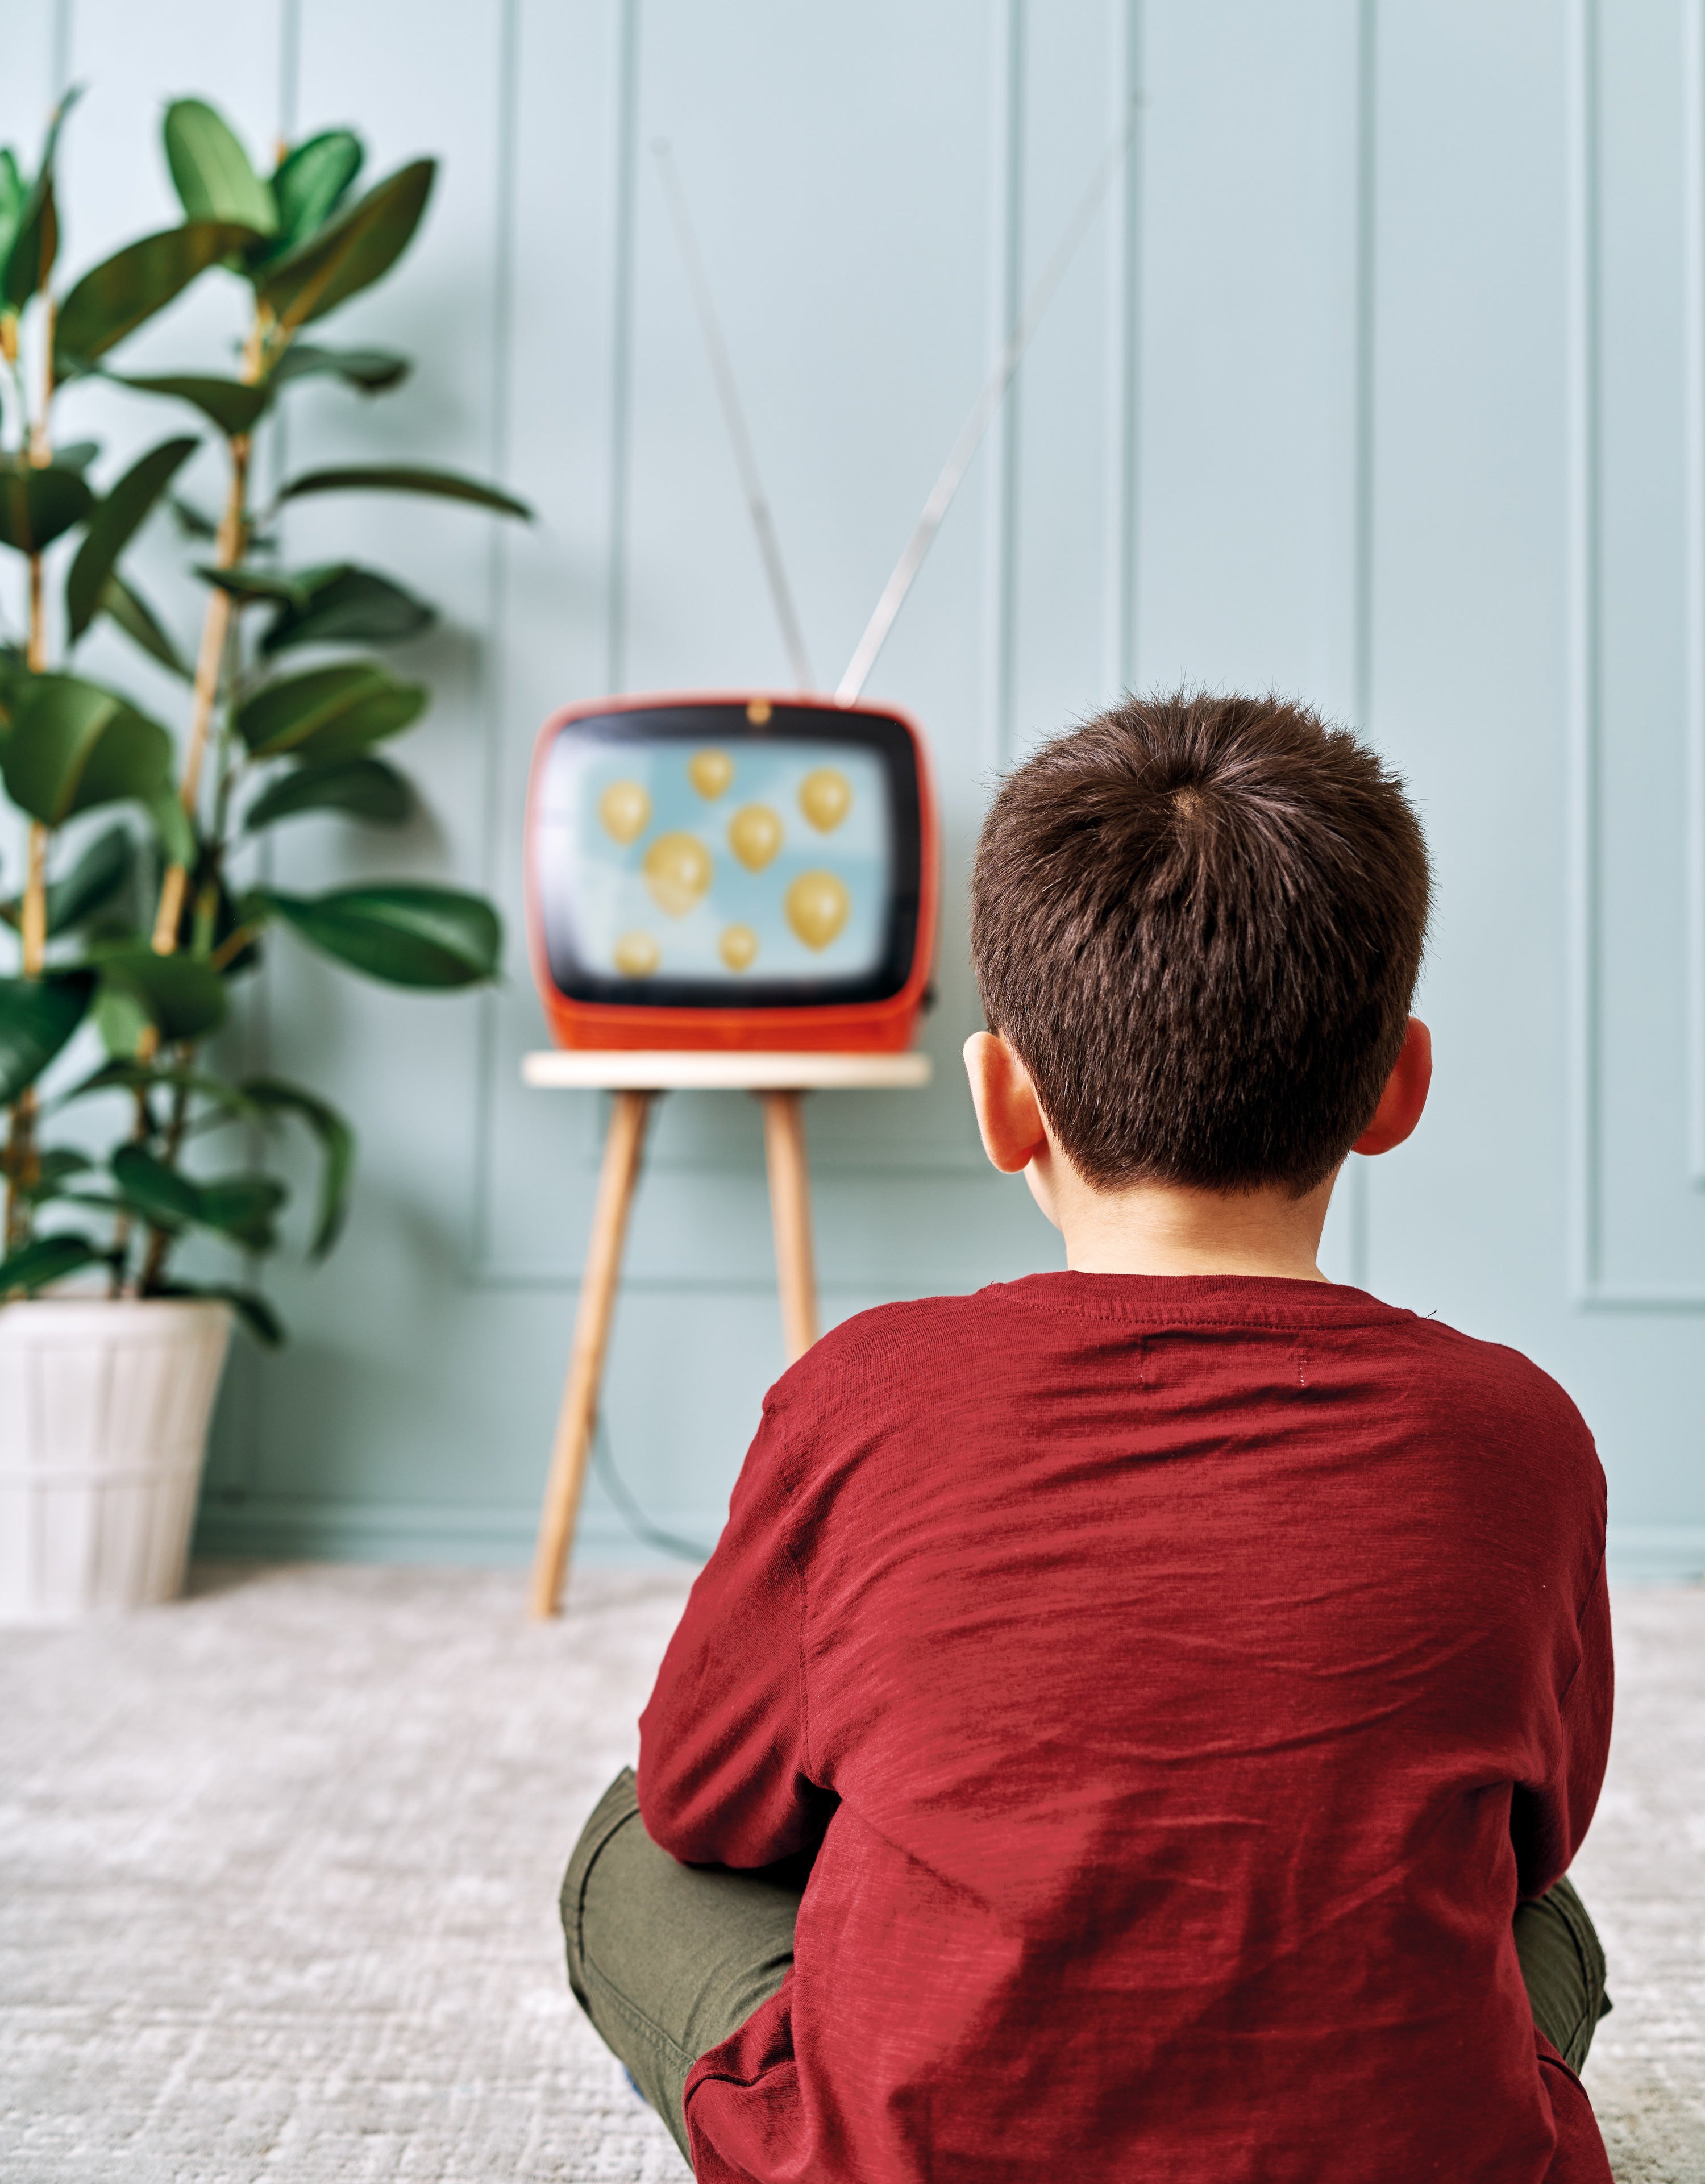 A boy watches a show at home on a retro TV set